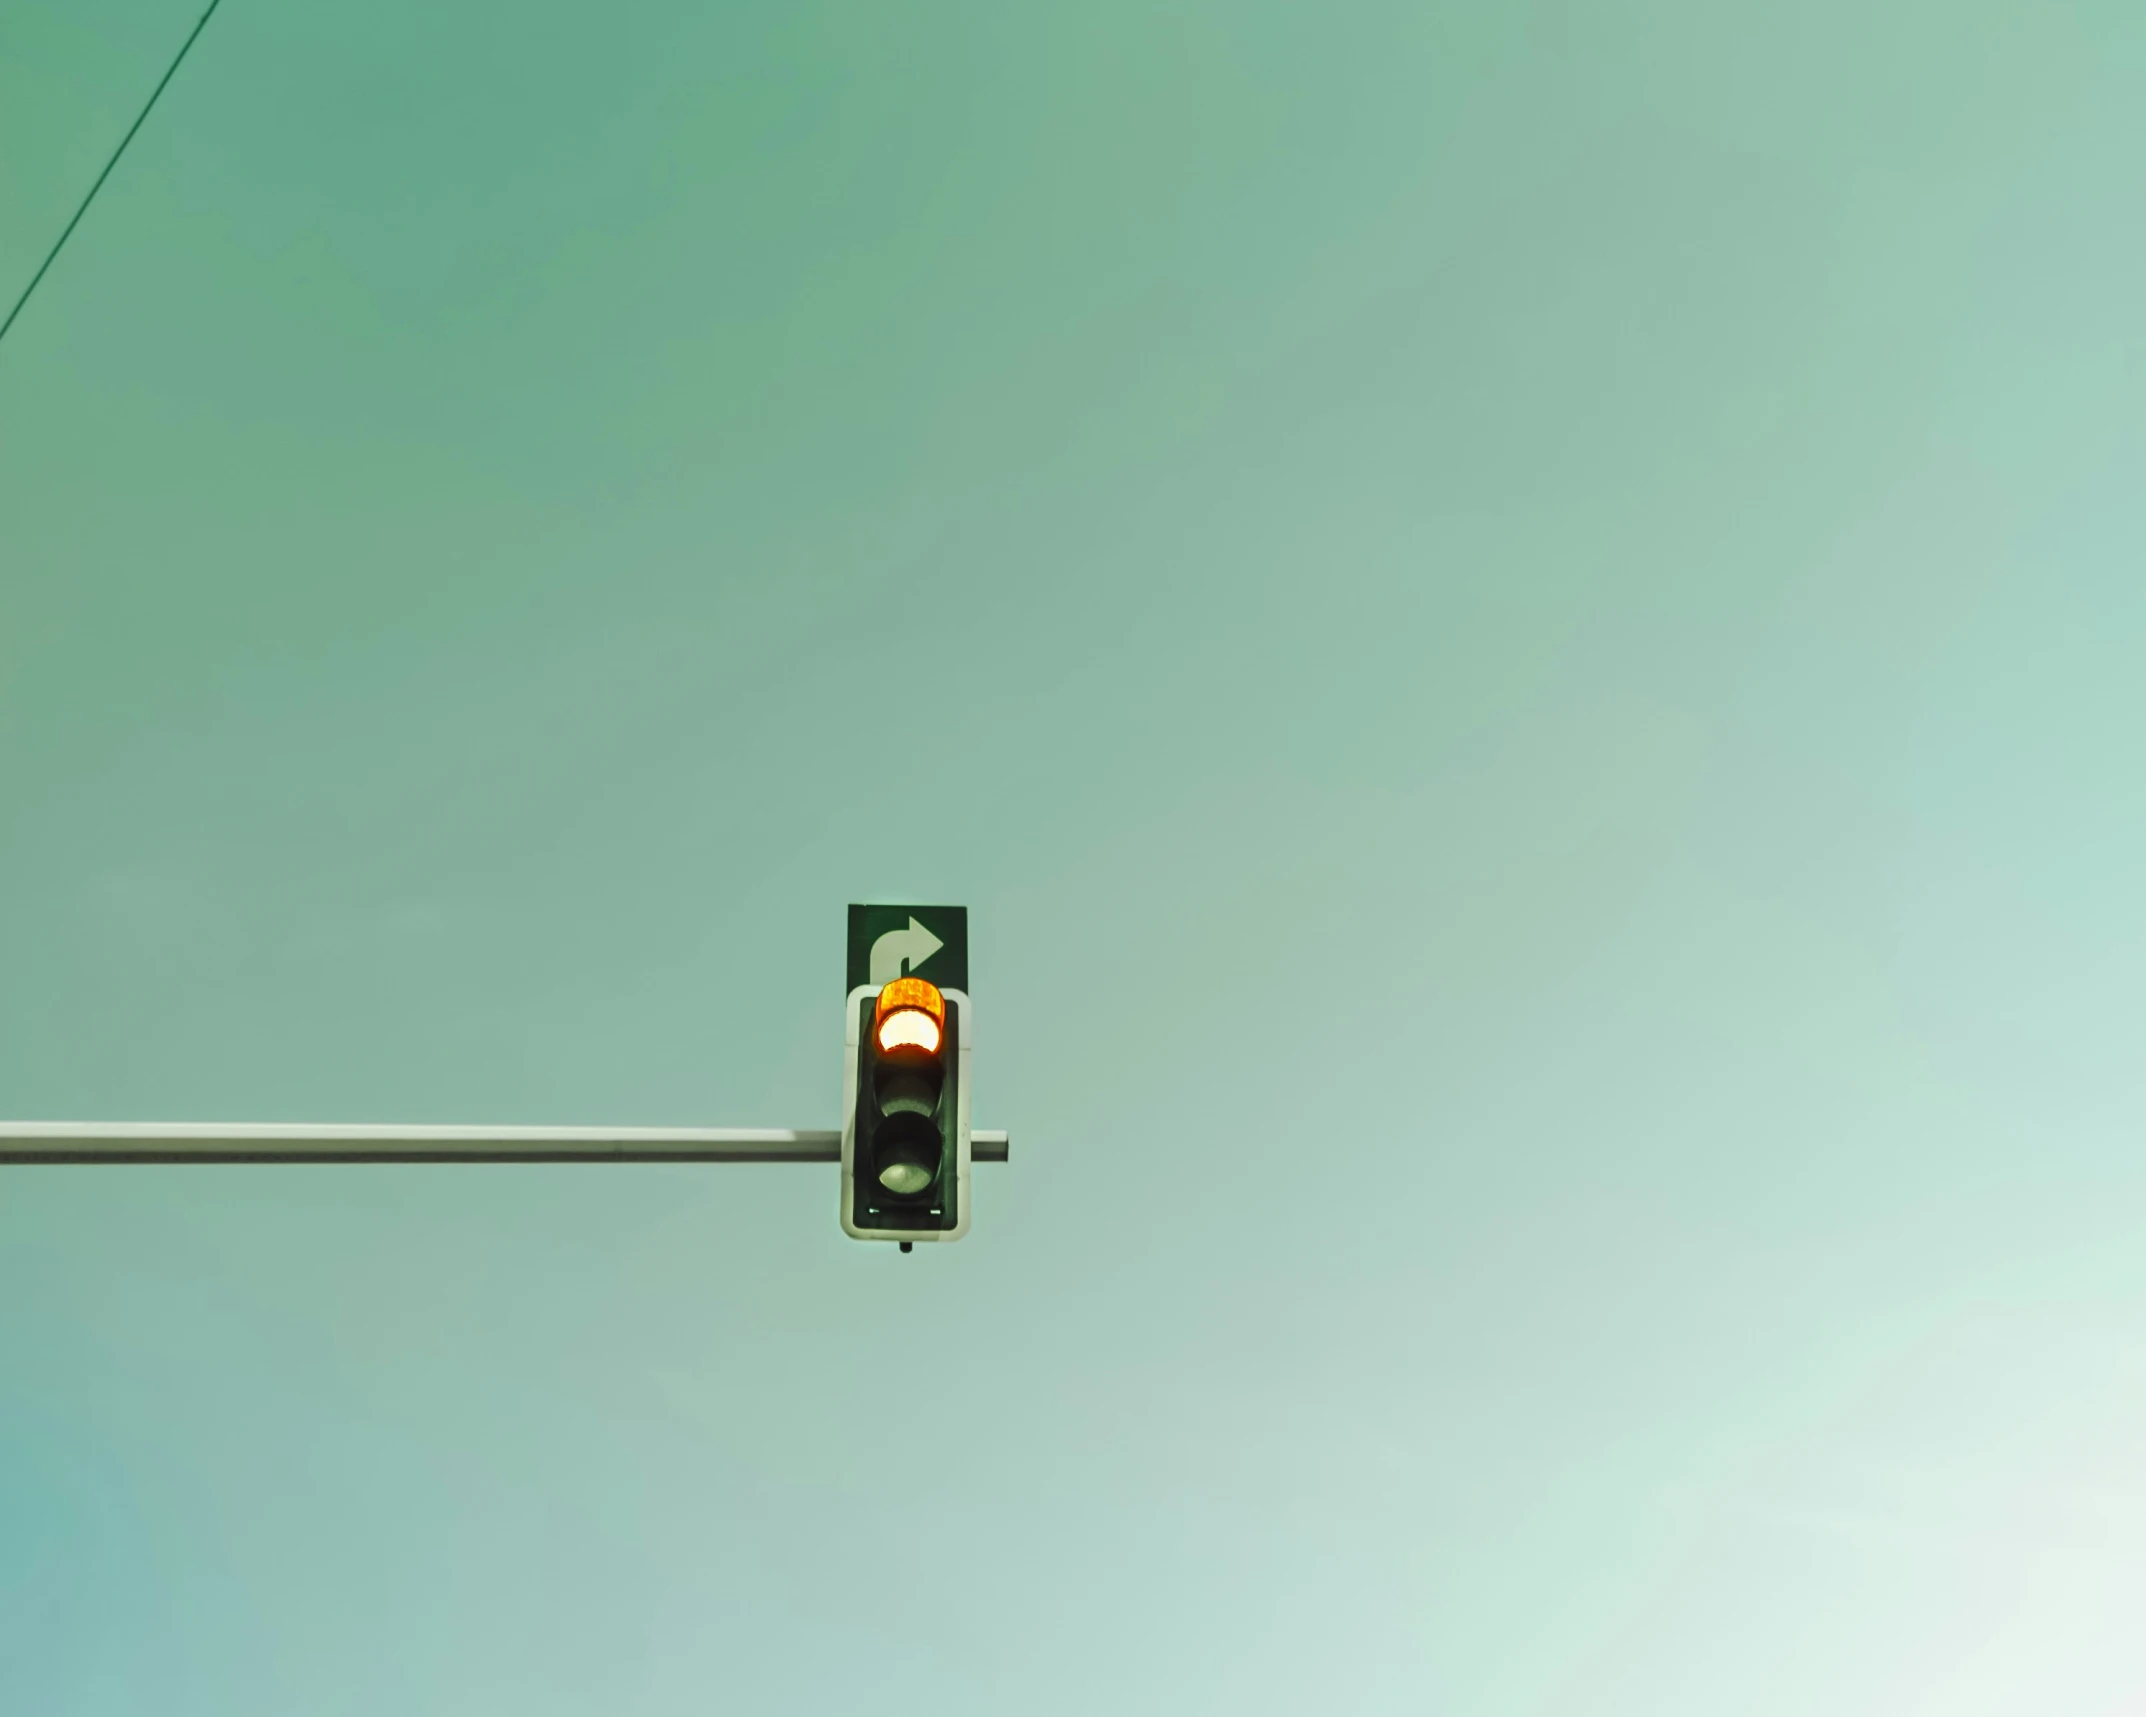 the stop light is green, so there is a stop signal at the end